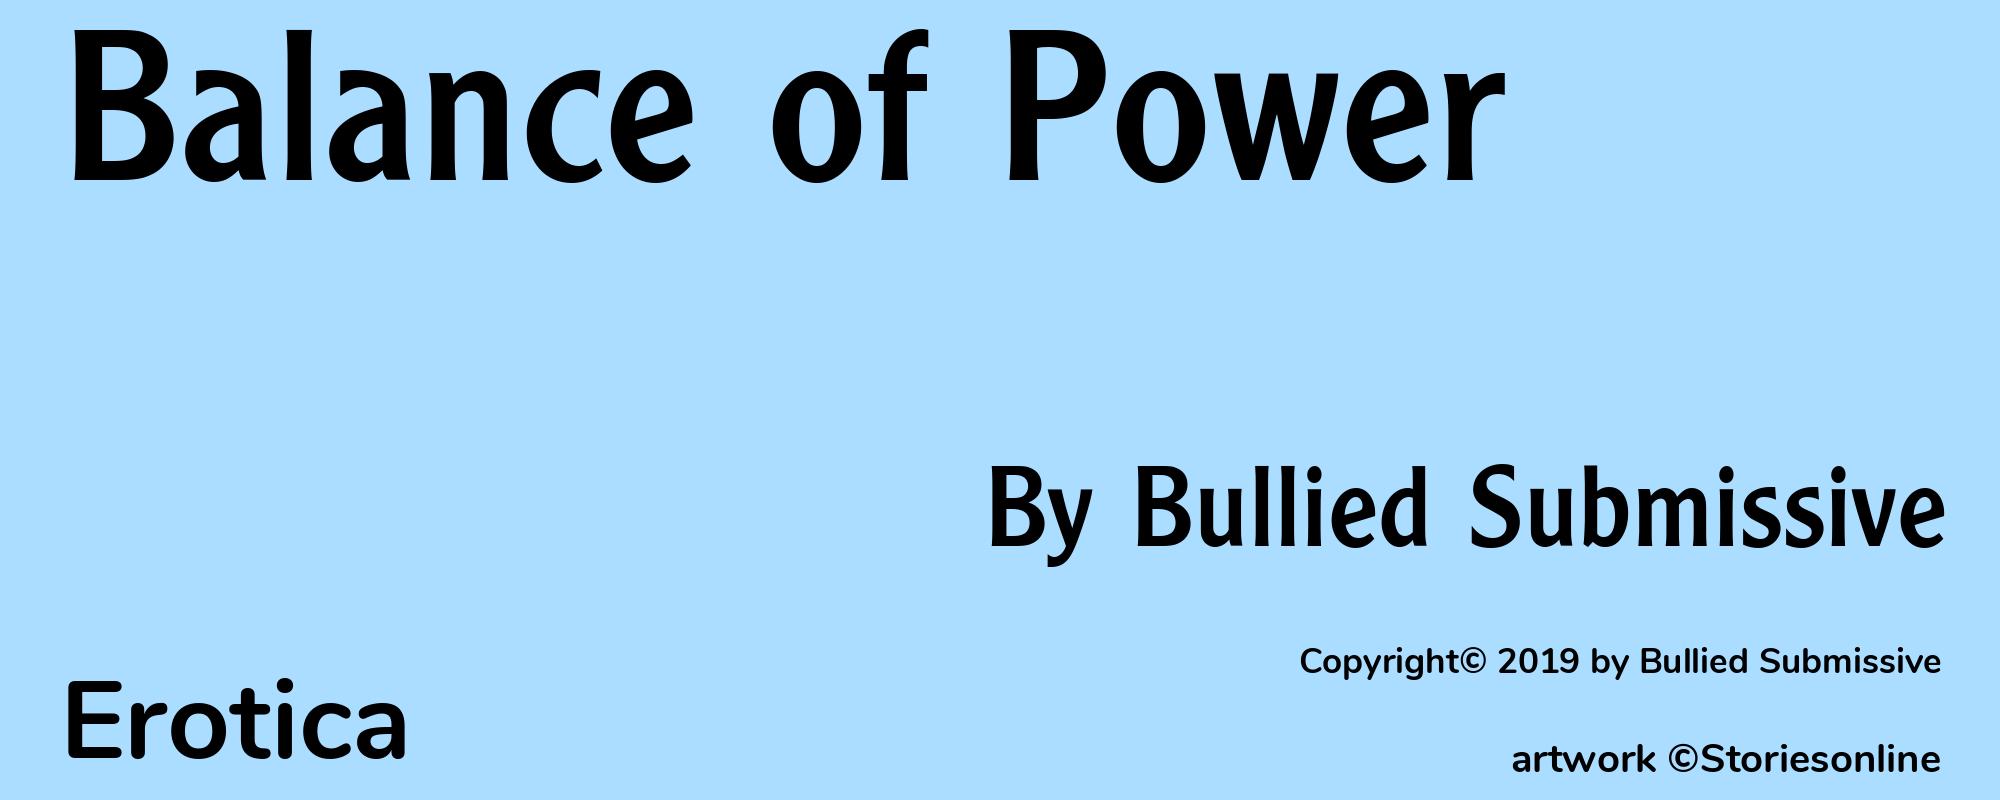 Balance of Power - Cover